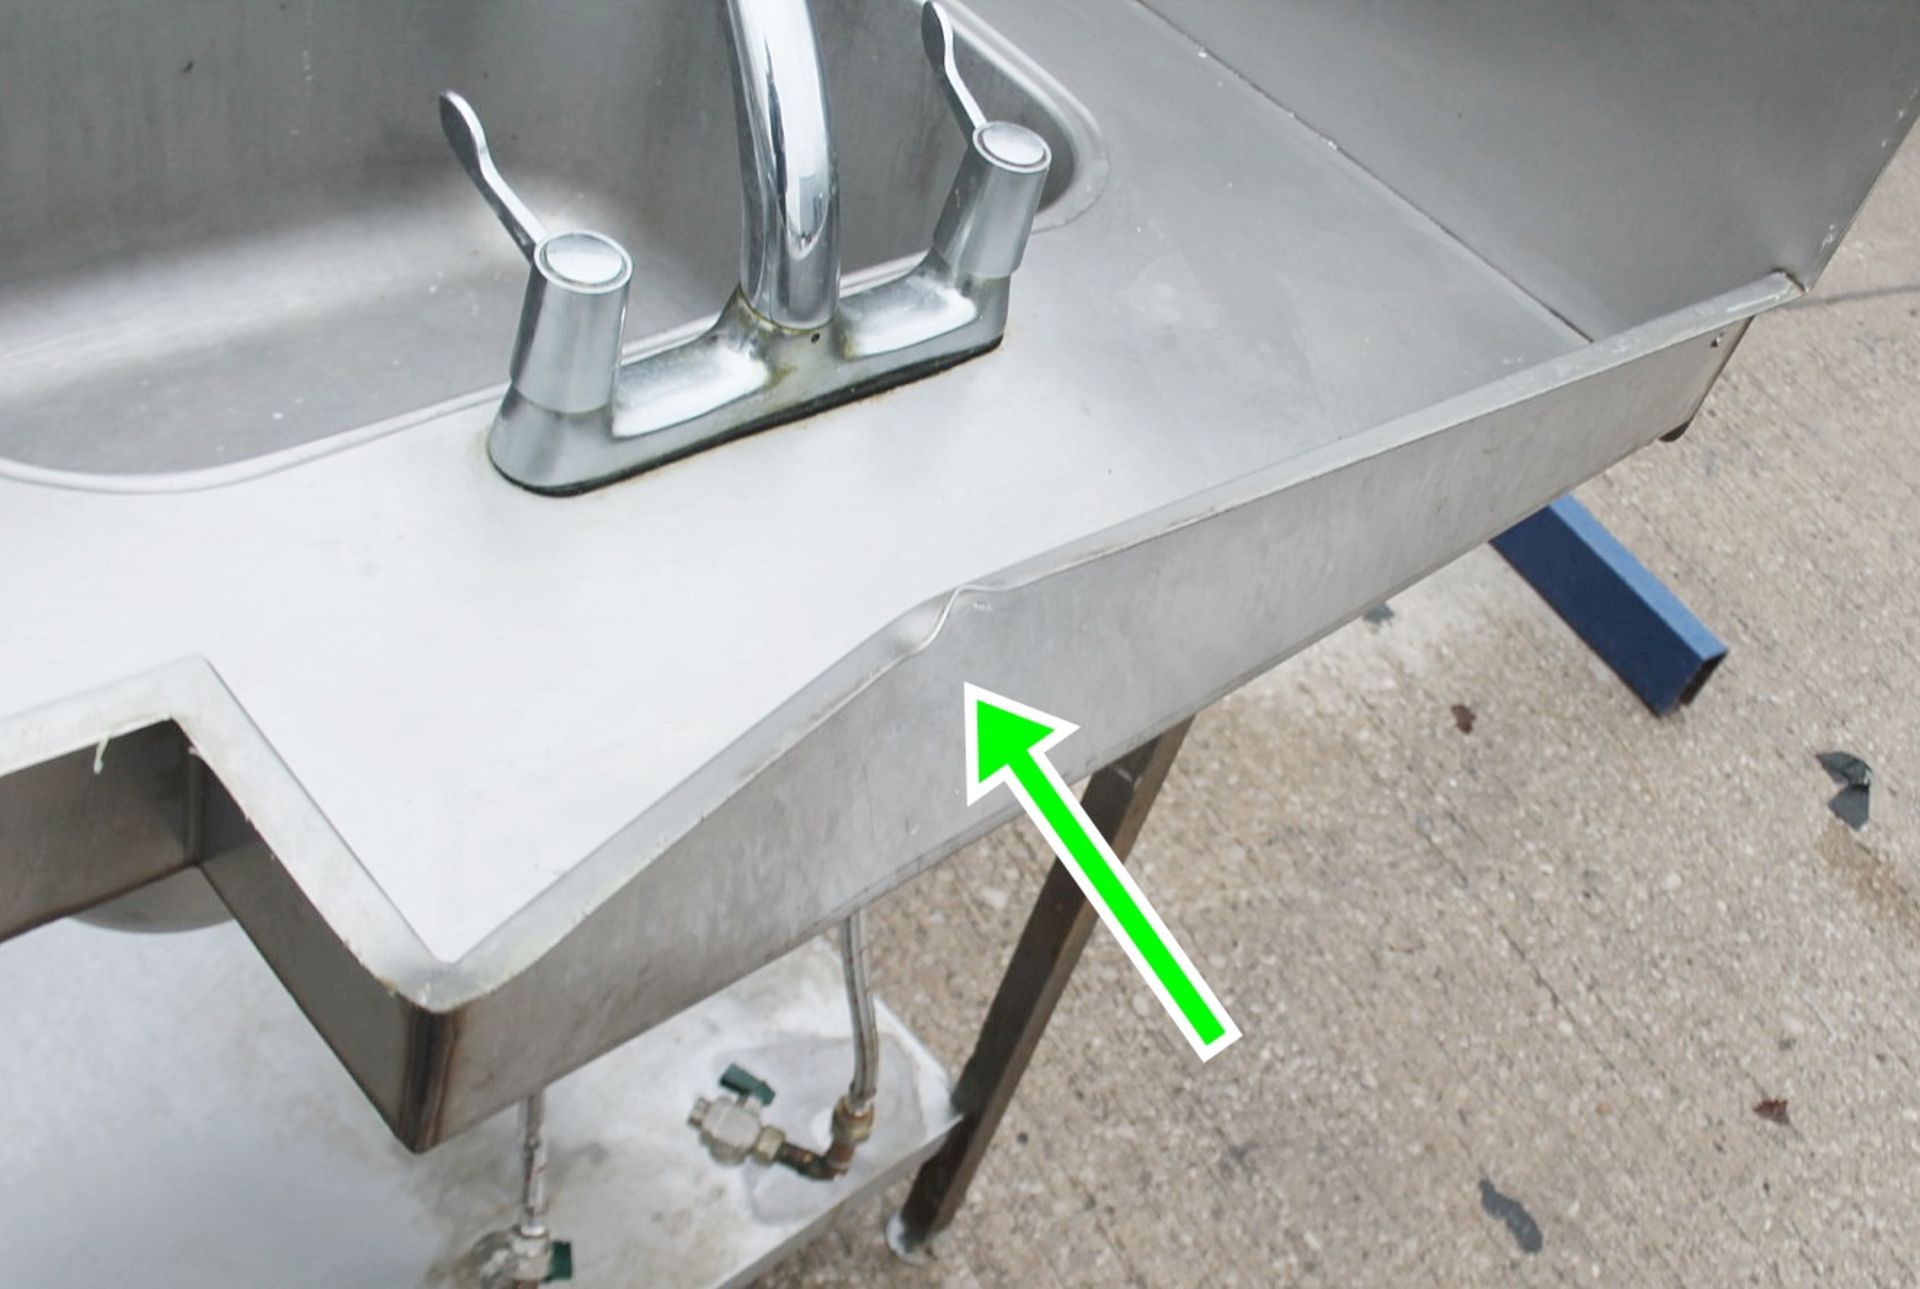 1 x Stainless Steel Commercial Wash Station / Sink Unit, With Upstand And Undershelf - Ref: GEN545 - Image 5 of 6